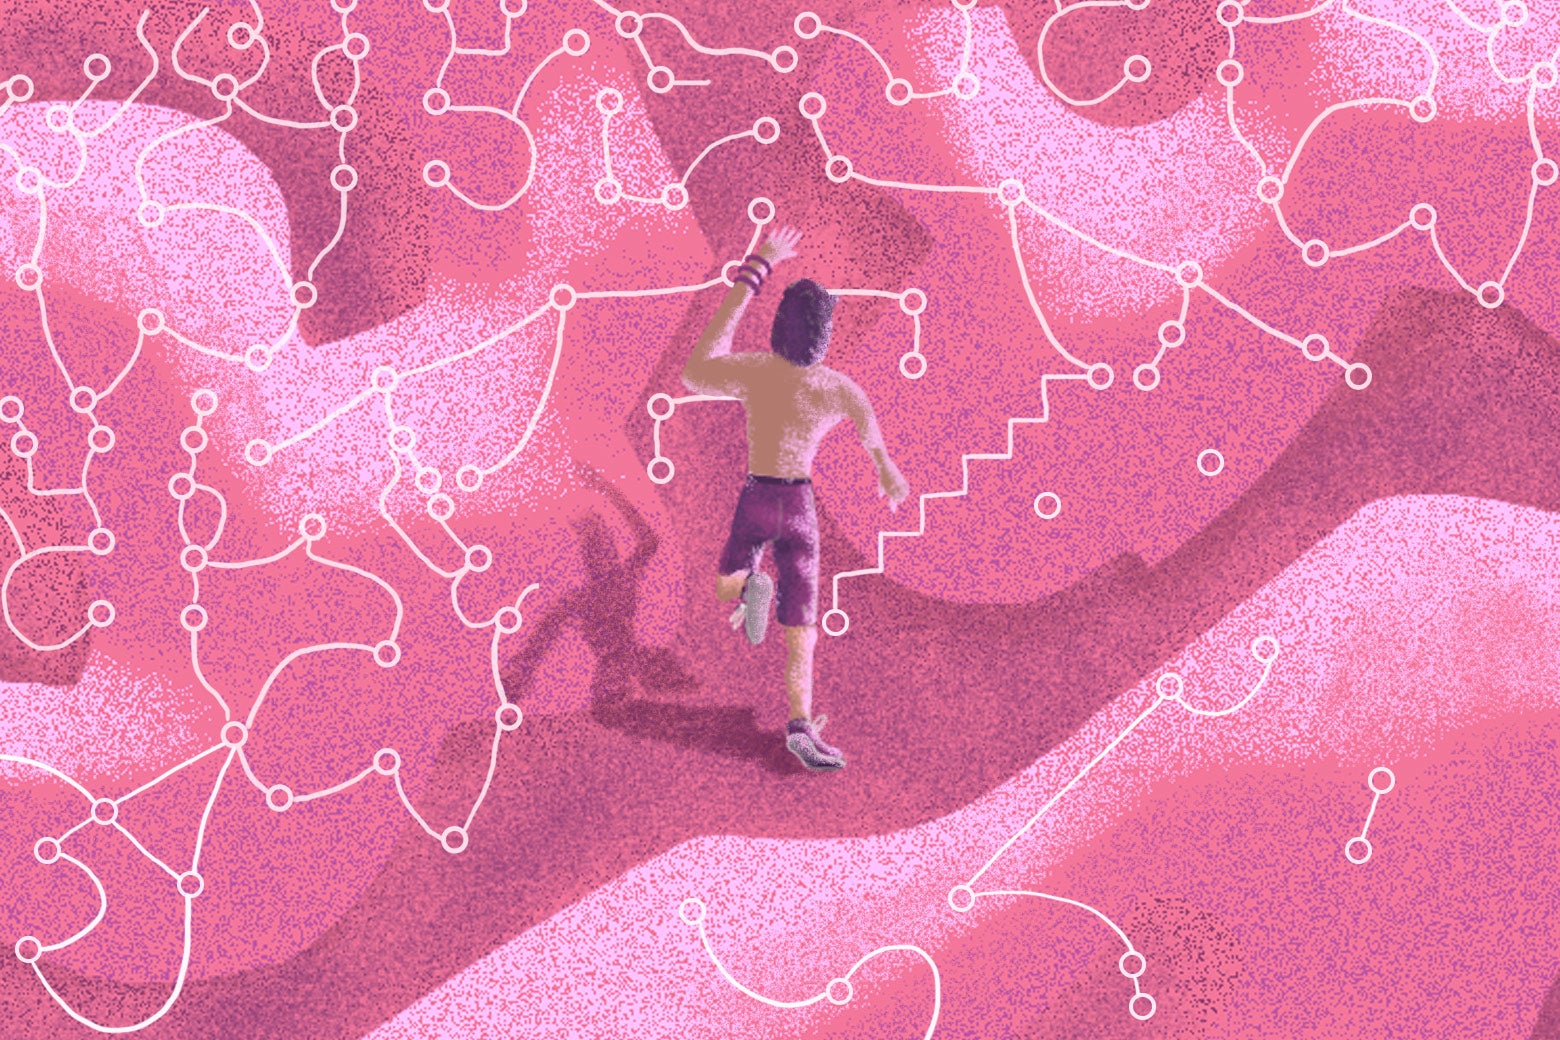 A man jogs away in a surreal pink map. 